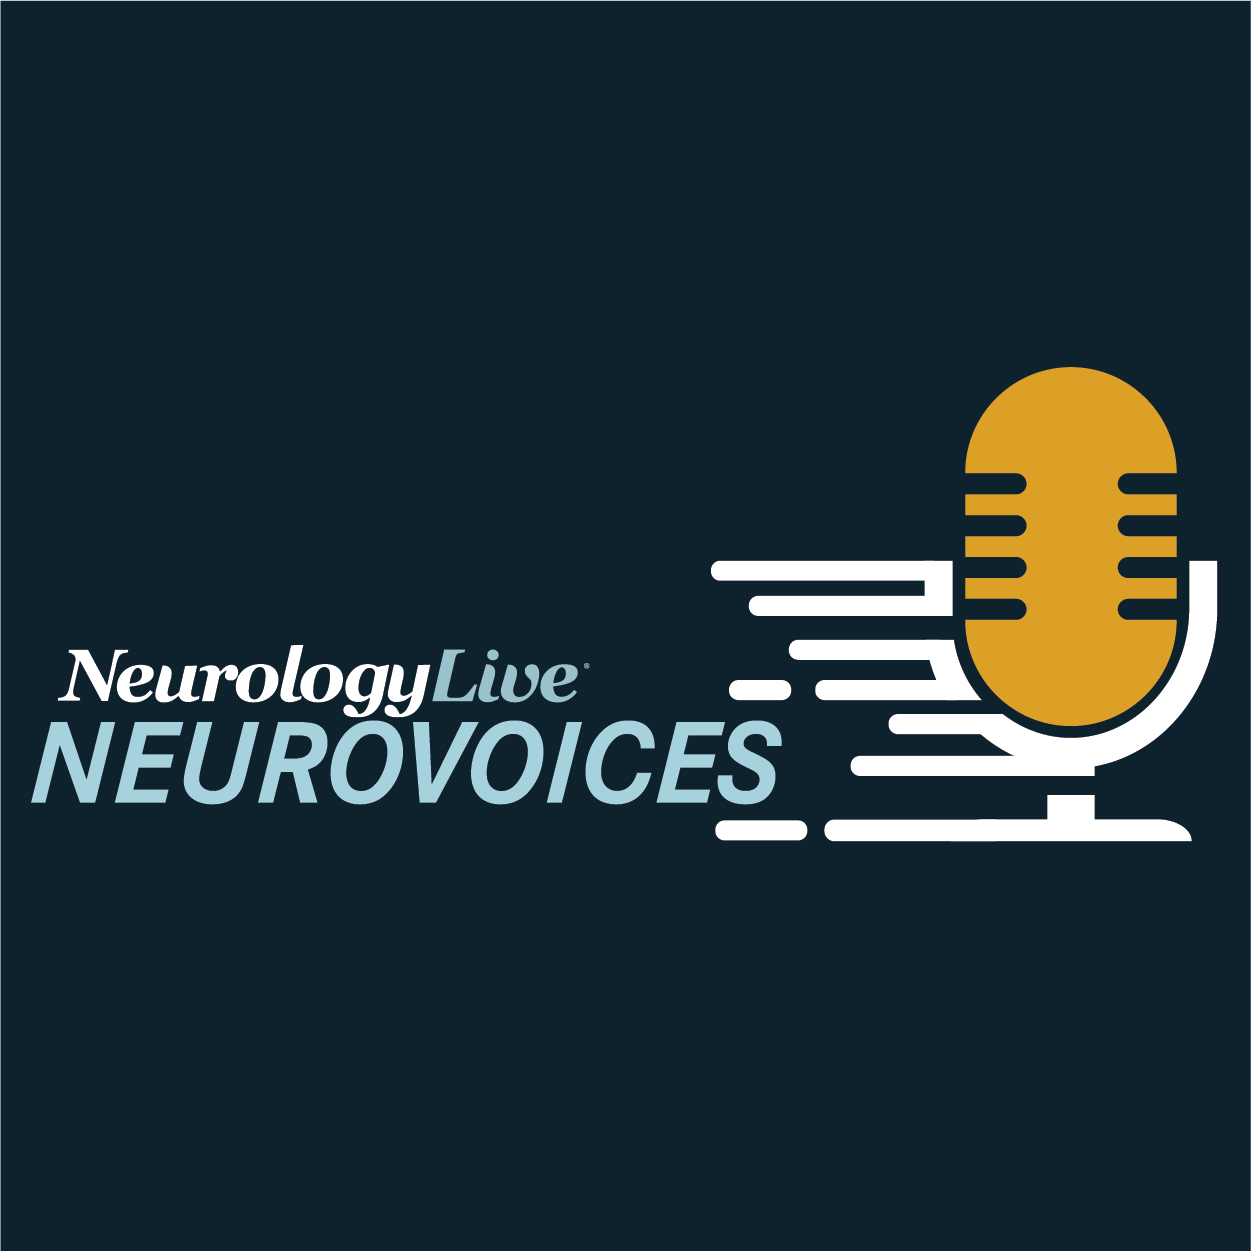 NeuroVoices: Katherine Peters, PhD, on Vorasidenib’s Impact on Quality of Life, Neurocognition, and Seizures in the Treatment of Gliomas